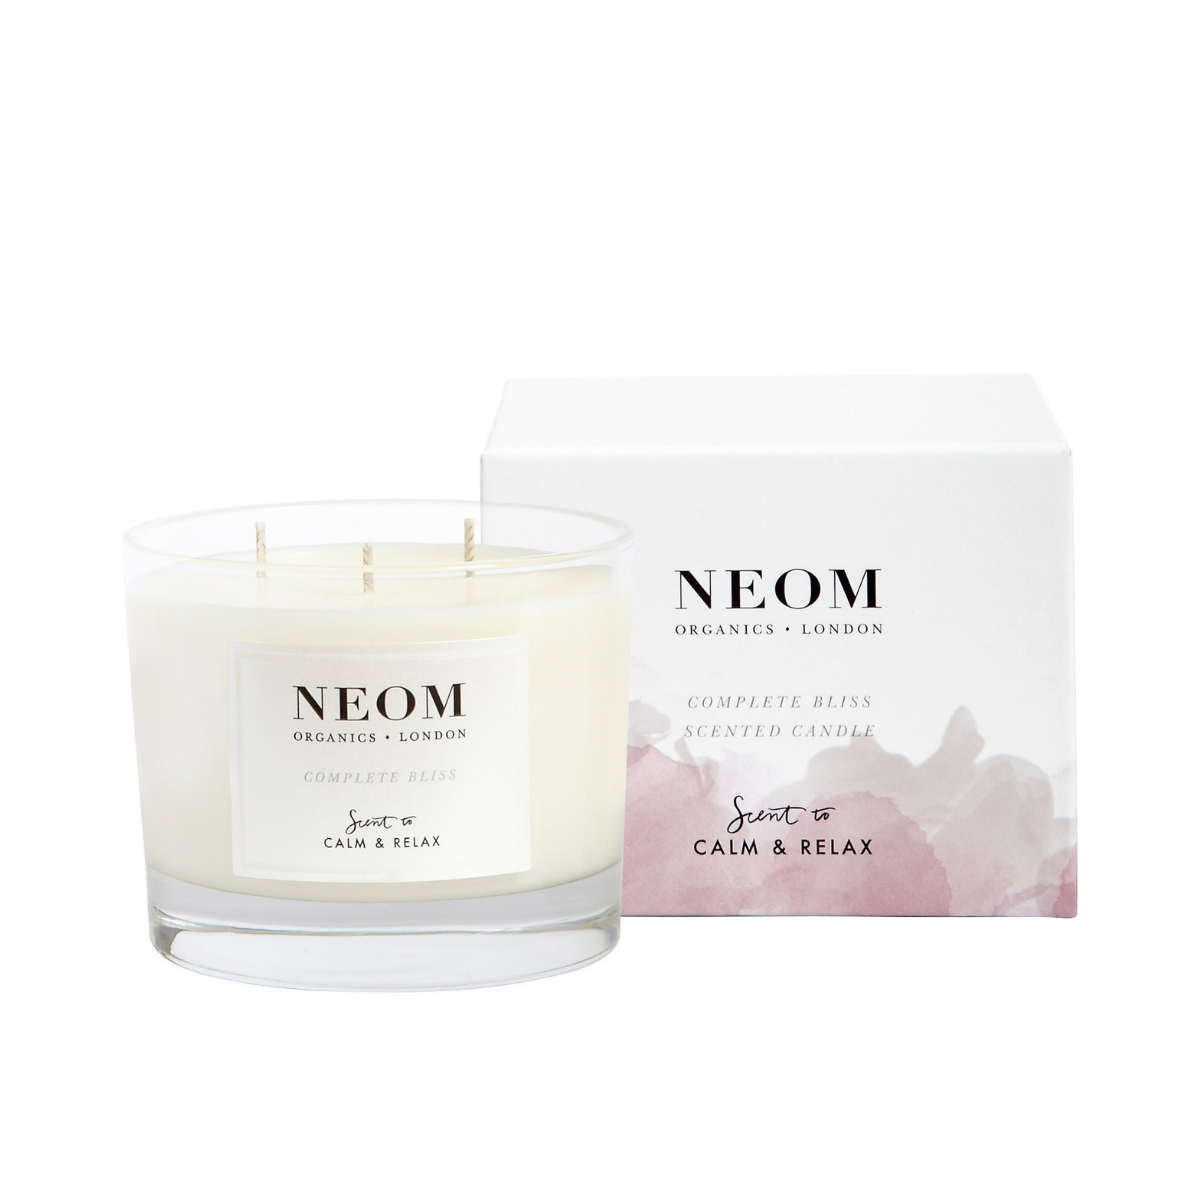 Neom Scent to Calm & Relax Complete Bliss Scented Candle 3 Wick